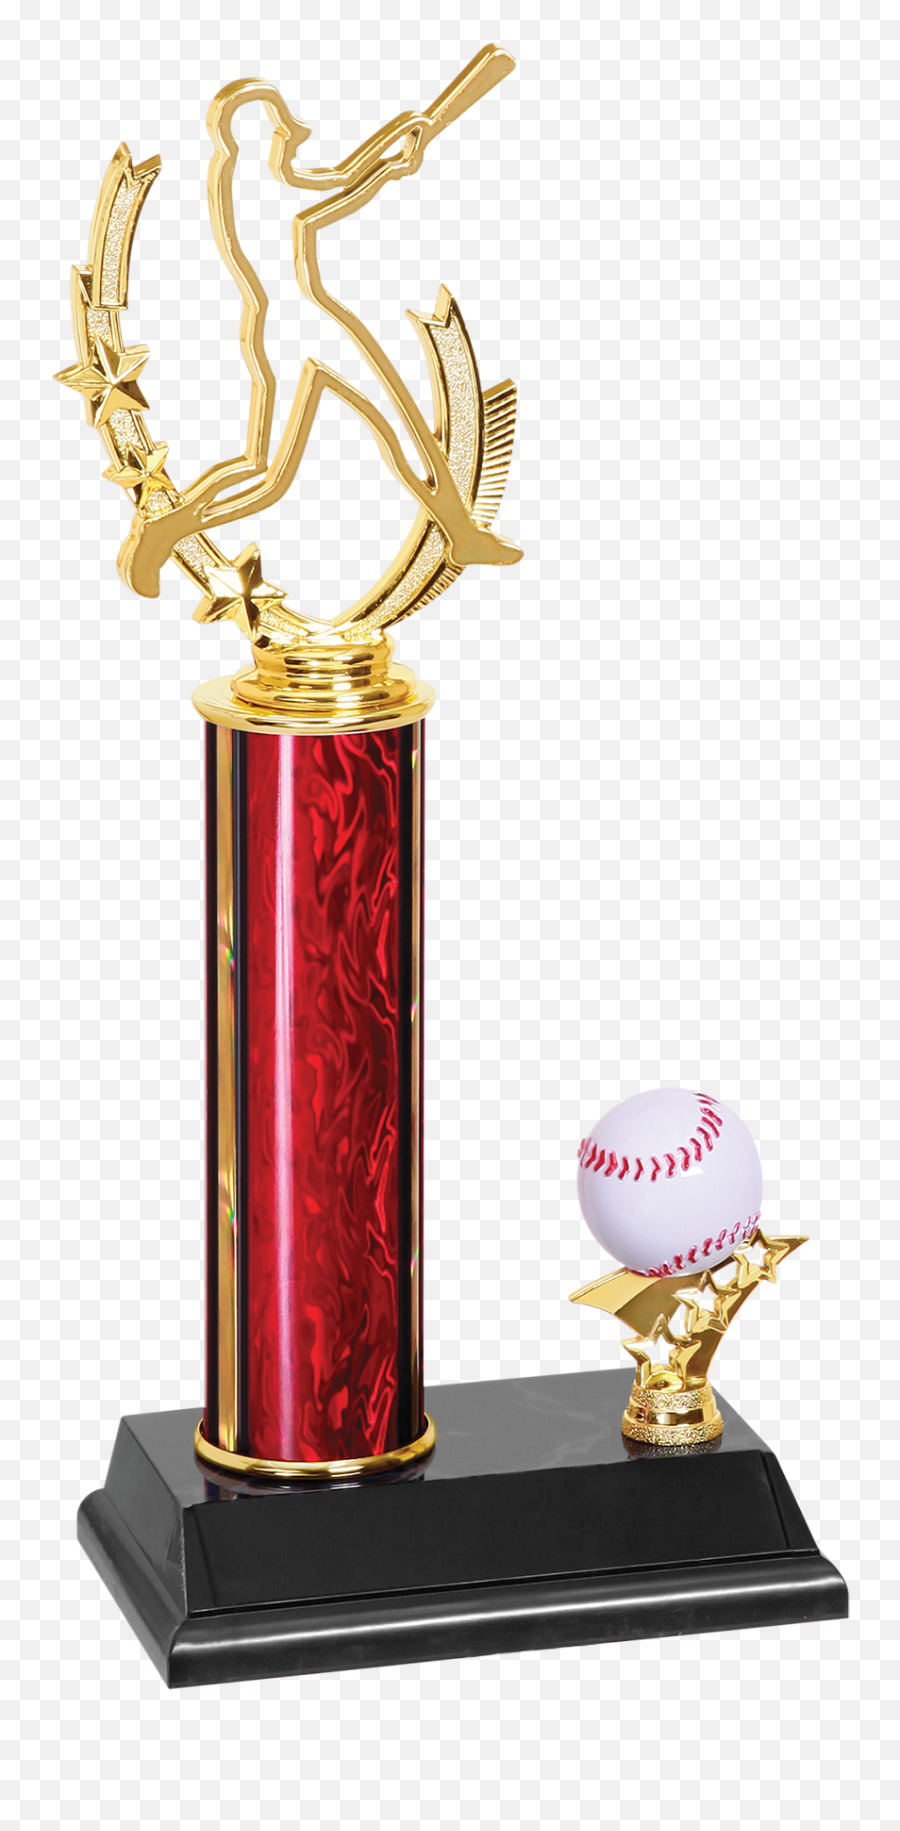 Download Trophy Png - Trophy Softball,Lombardi Trophy Png